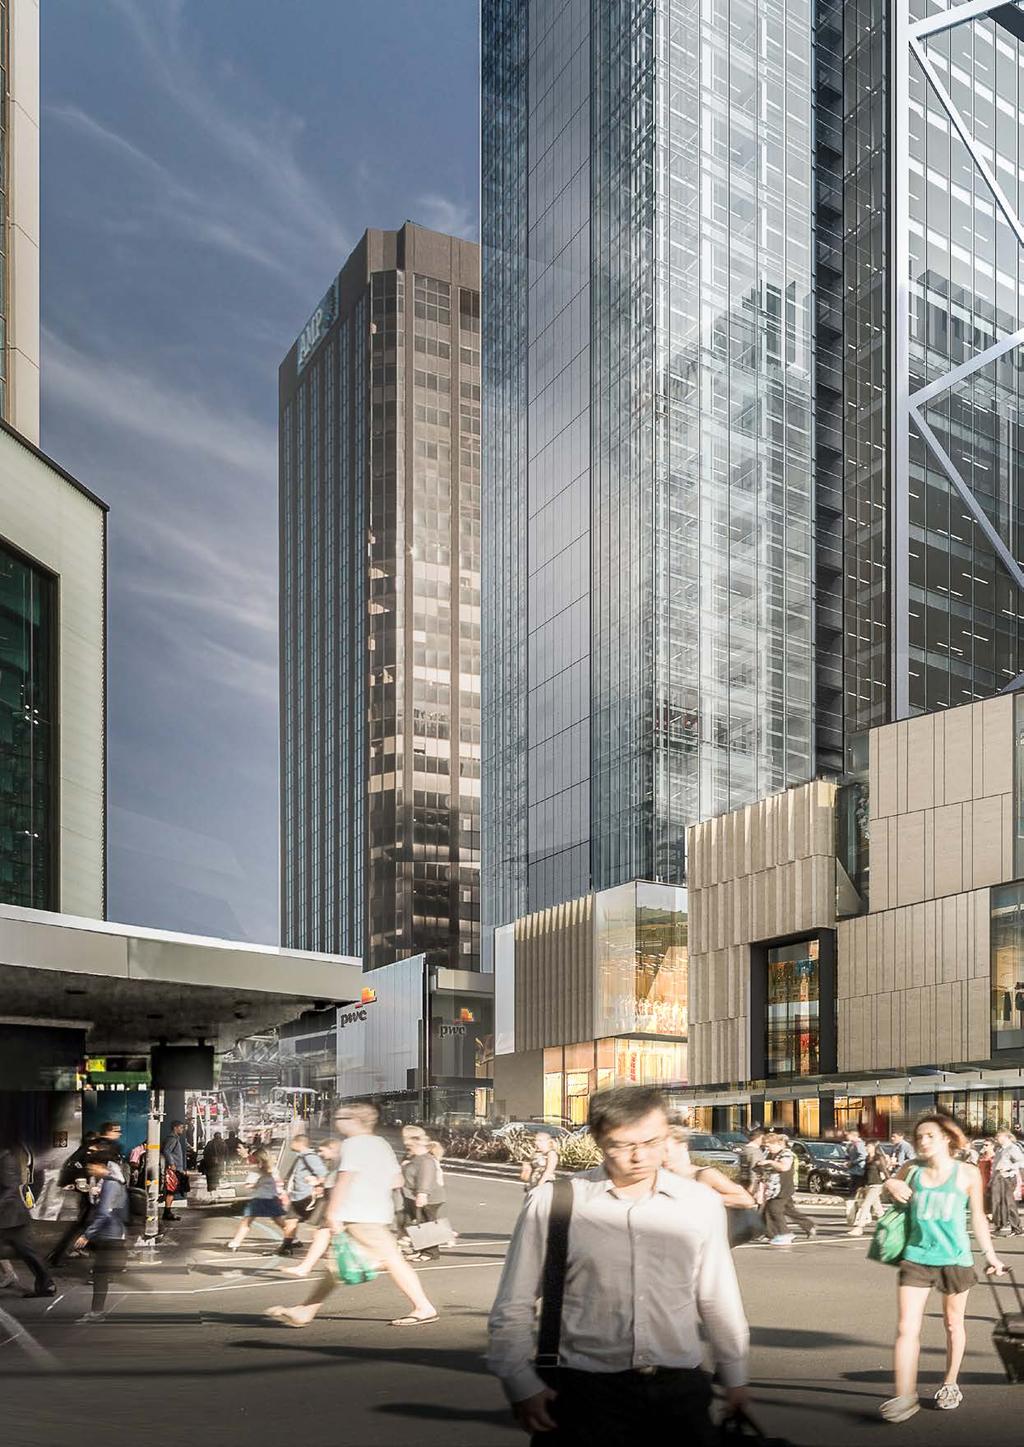 Commercial Bay Retail Centre Cnr Queen Street & Customs Street West, Auckland Central Precinct Properties 39,000 sqm PwC Tower and 18,000 sqm Commercial Bay retail centre in downtown Auckland is